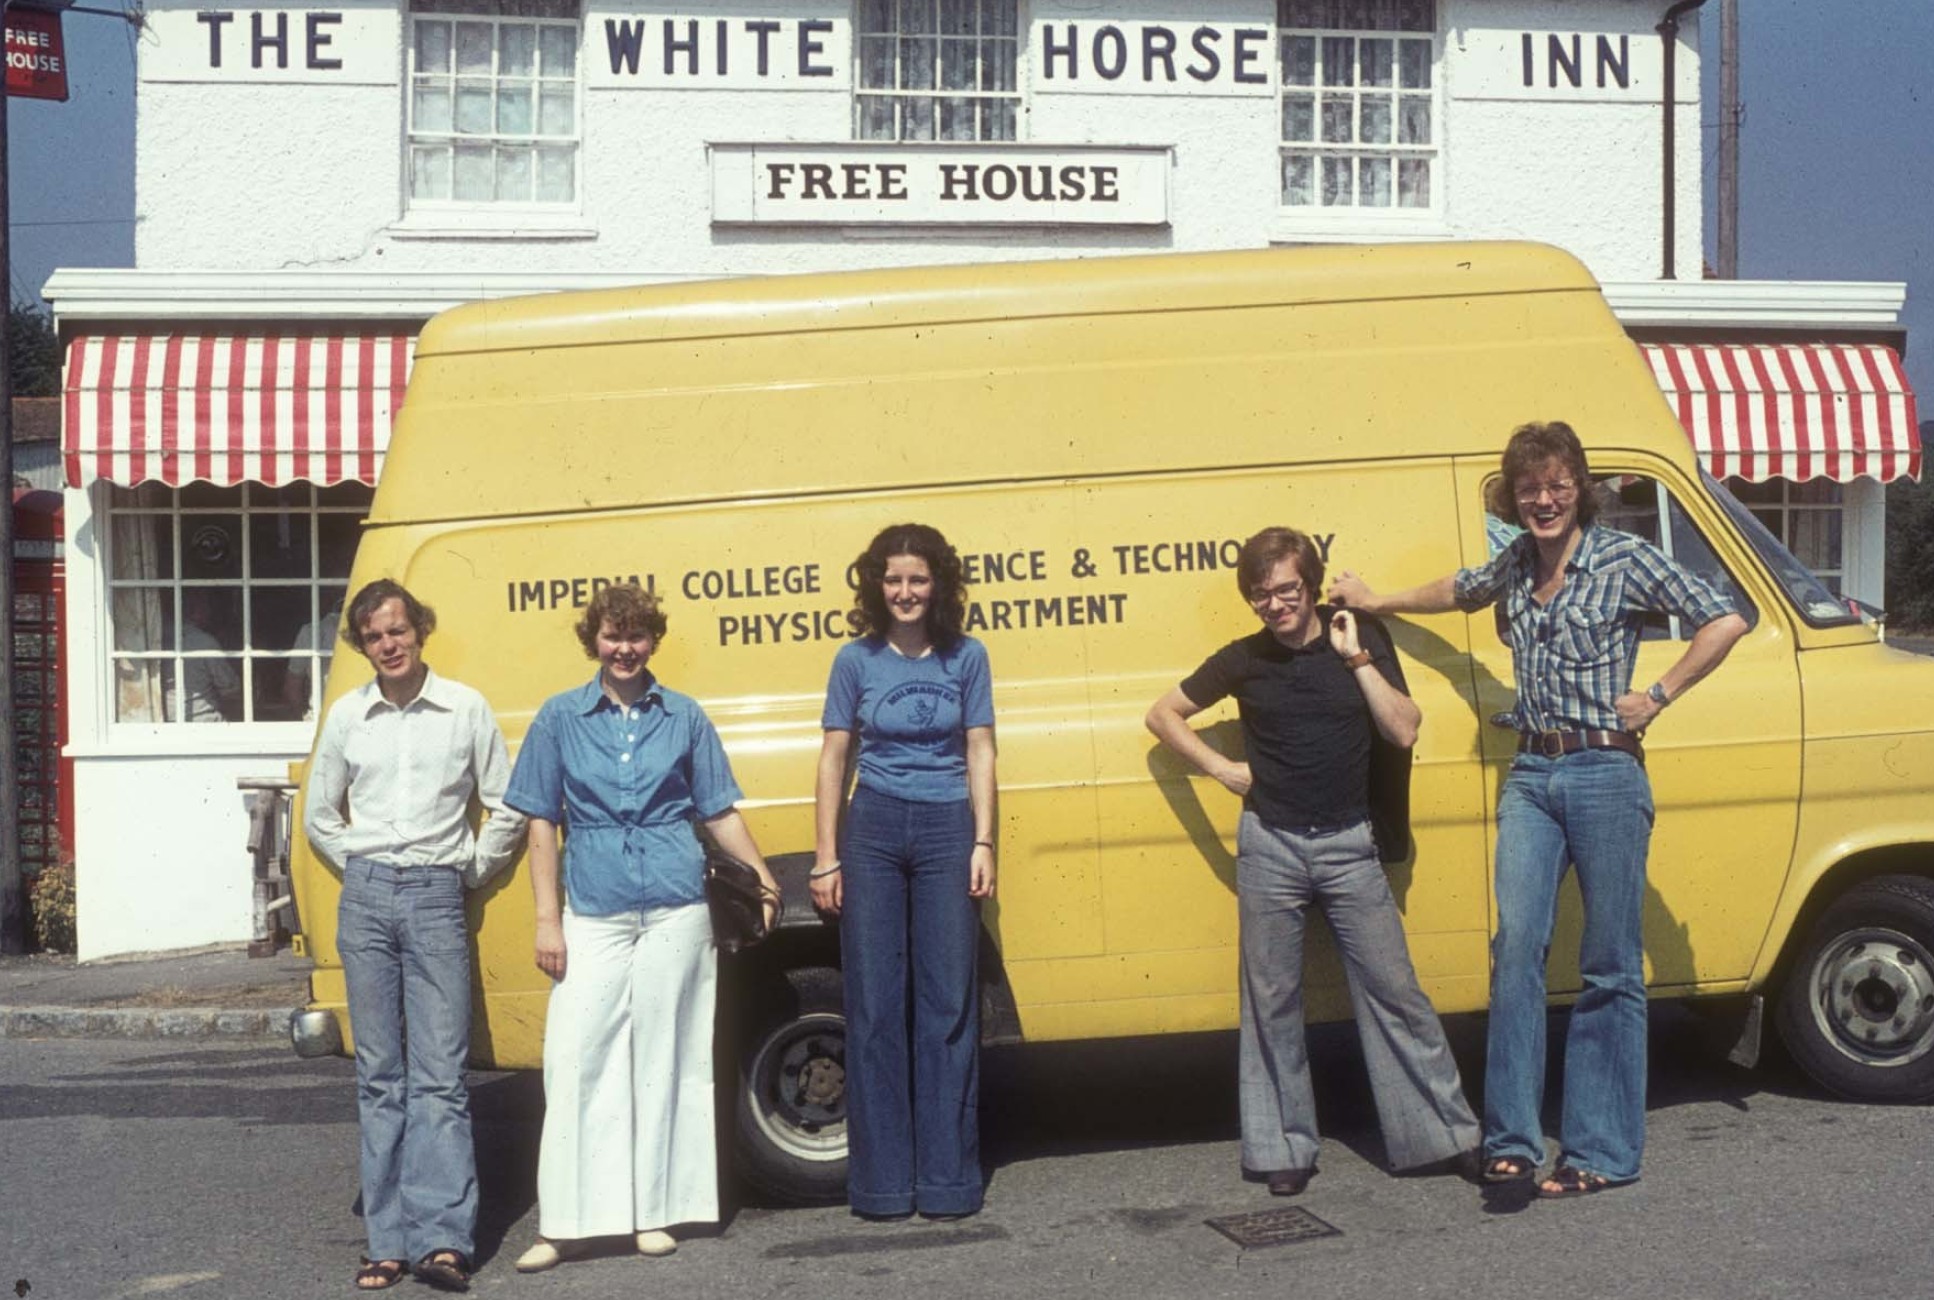 Paul and colleagues with the department van